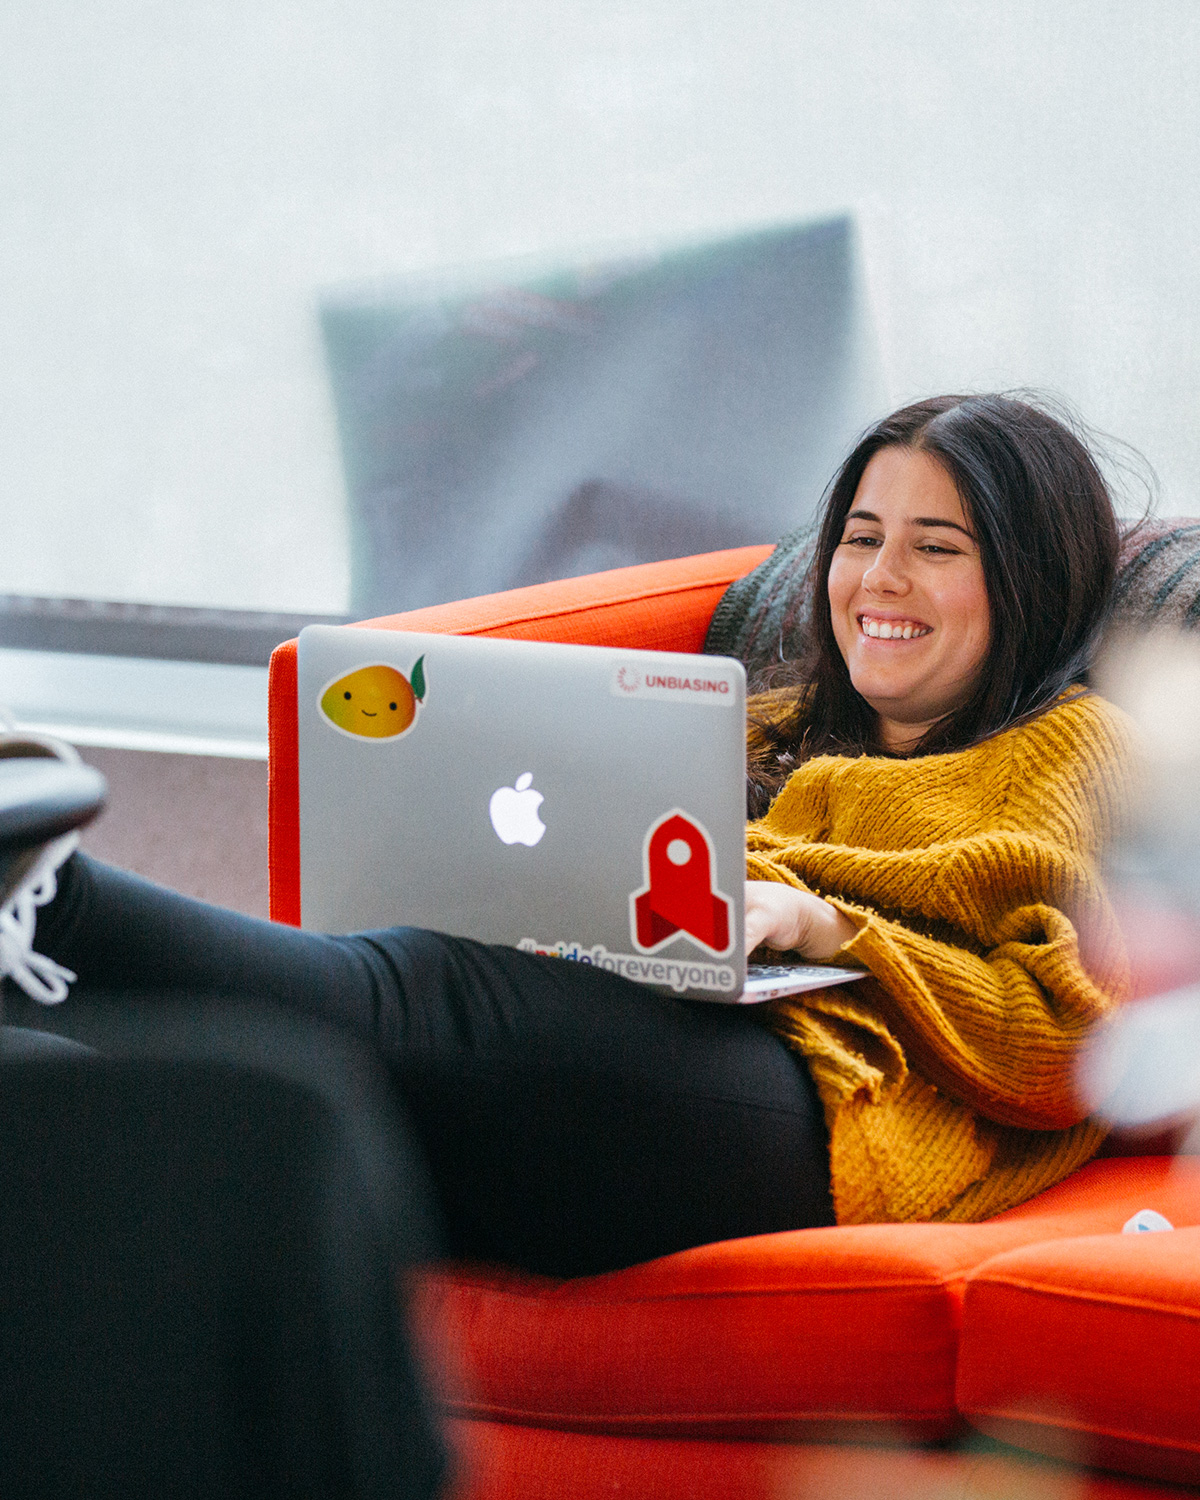 A woman with her feet up, in an orange chair, smiling while she works on her laptop.